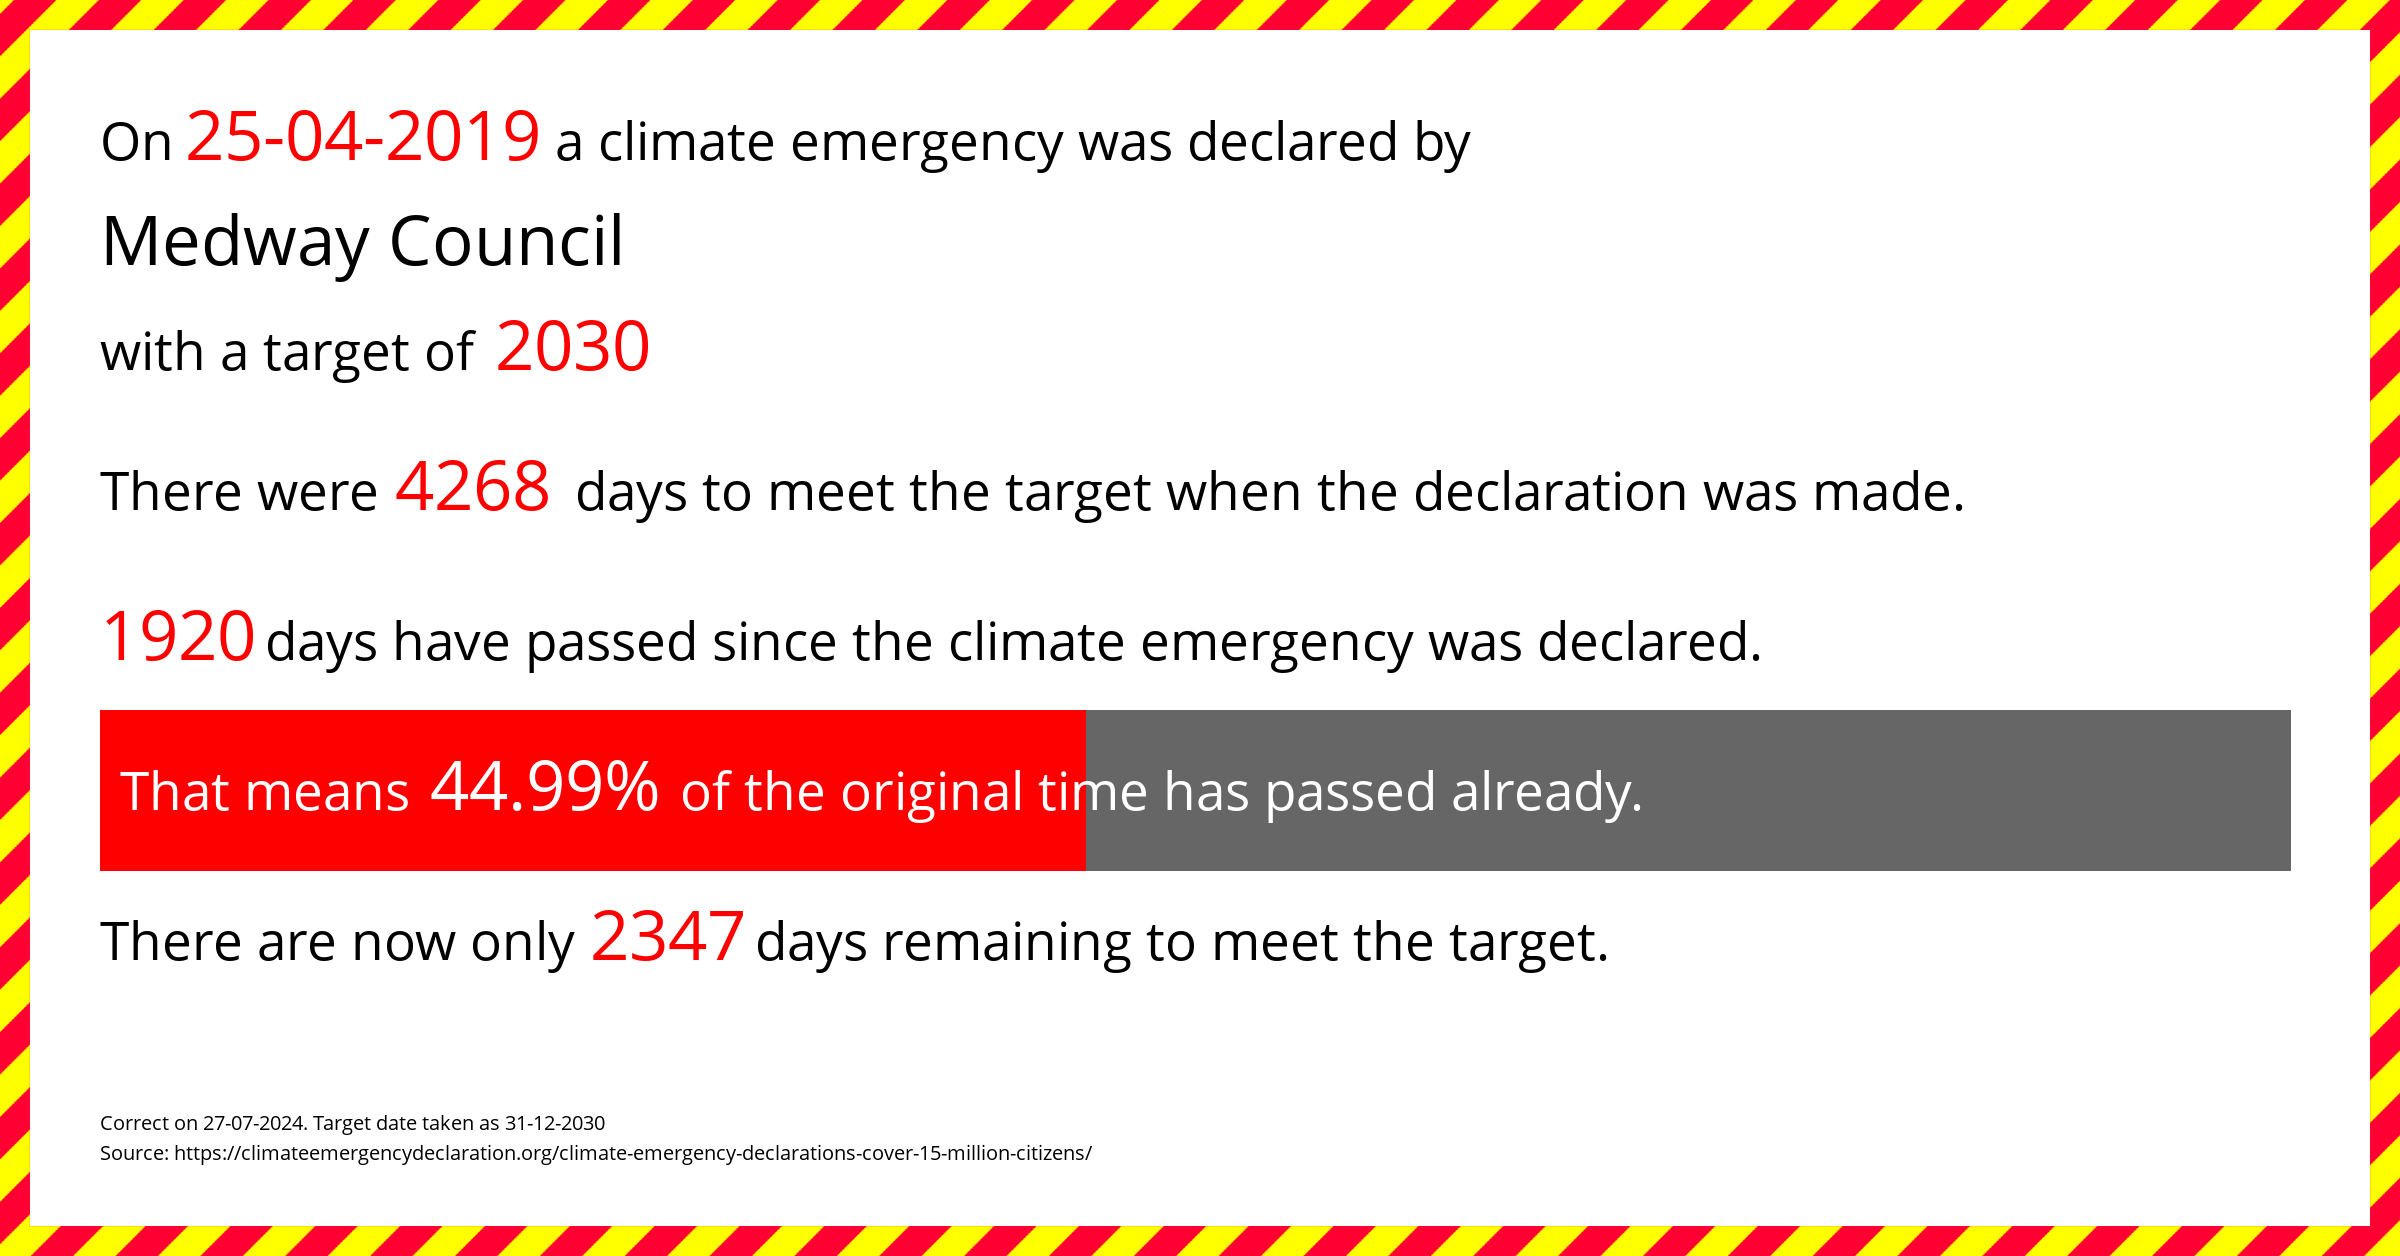 Medway Council declared a Climate emergency on Thursday 25th April 2019, with a target of 2030.